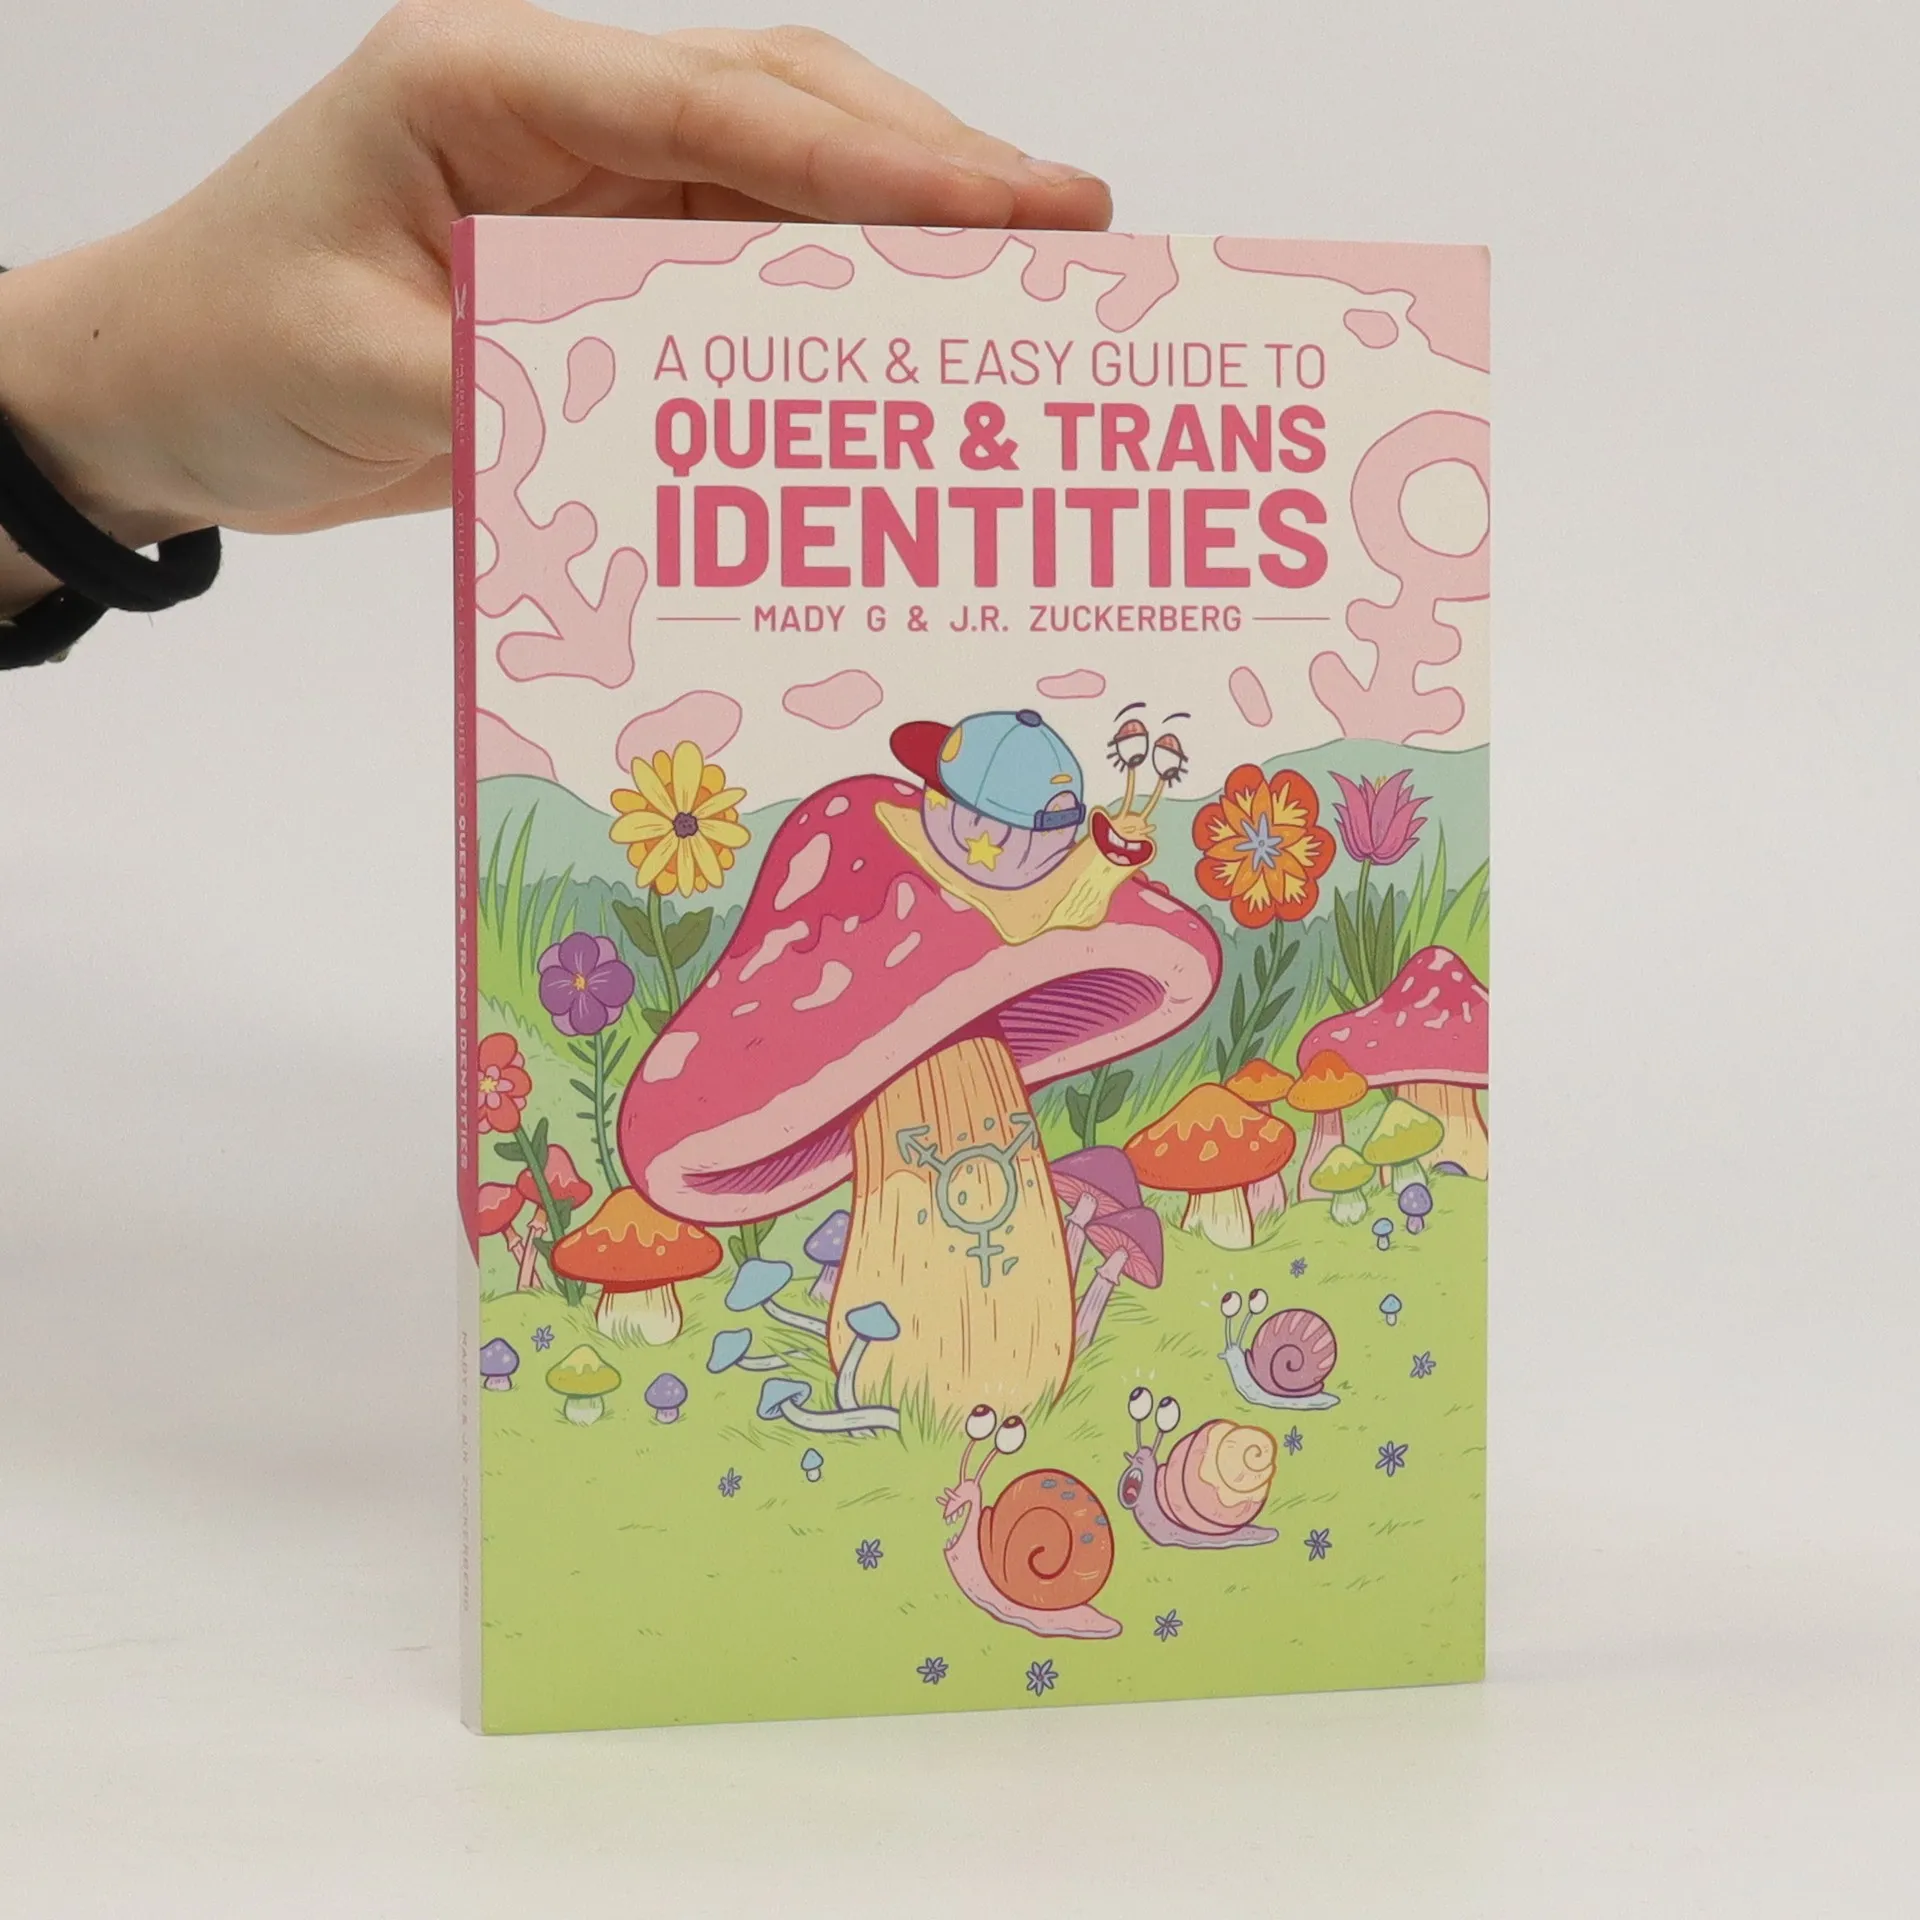 A Quick And Easy Guide To Queer And Trans Identities Knihobotsk 6327